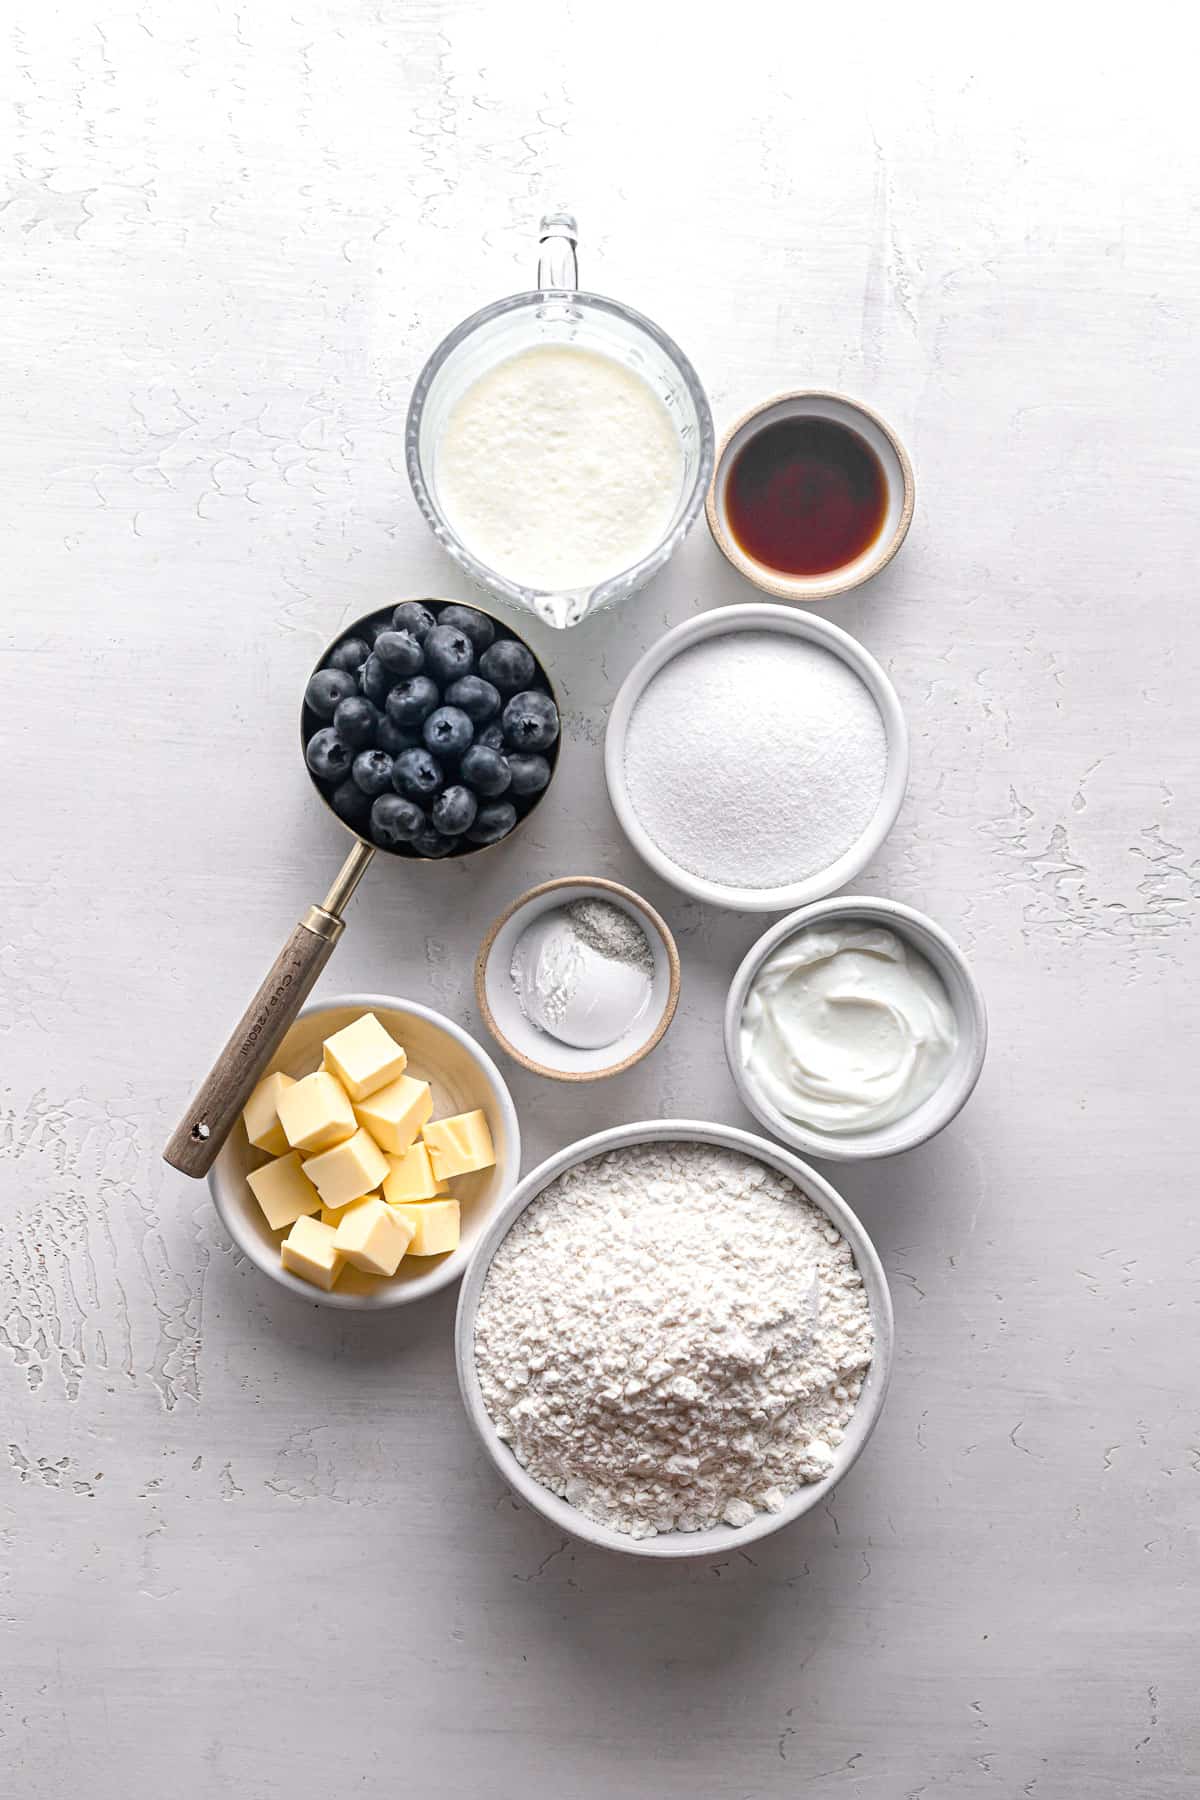 ingredients for blueberry scones.